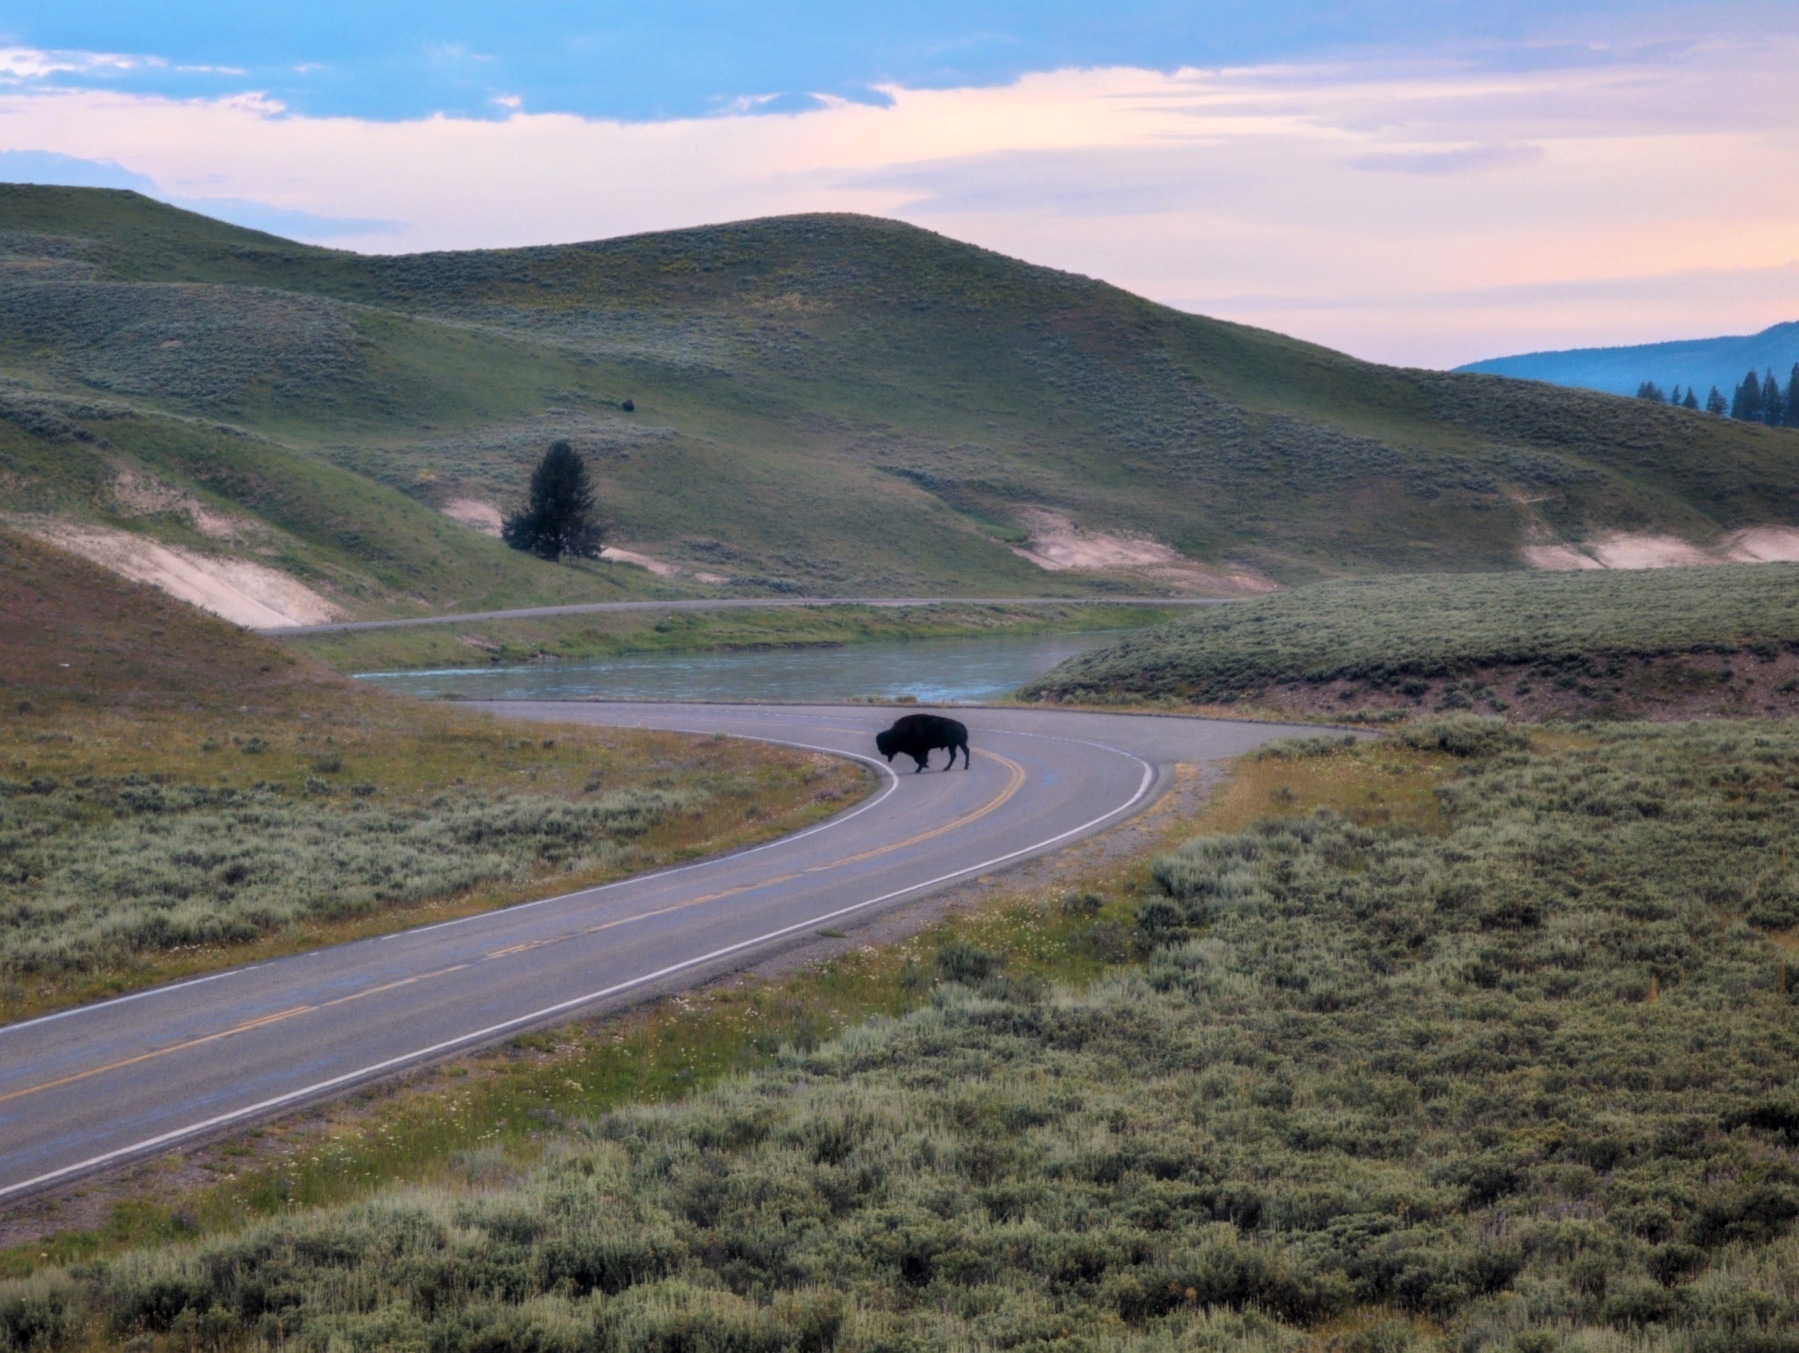 Bison on road in Yellowstone with river in the background